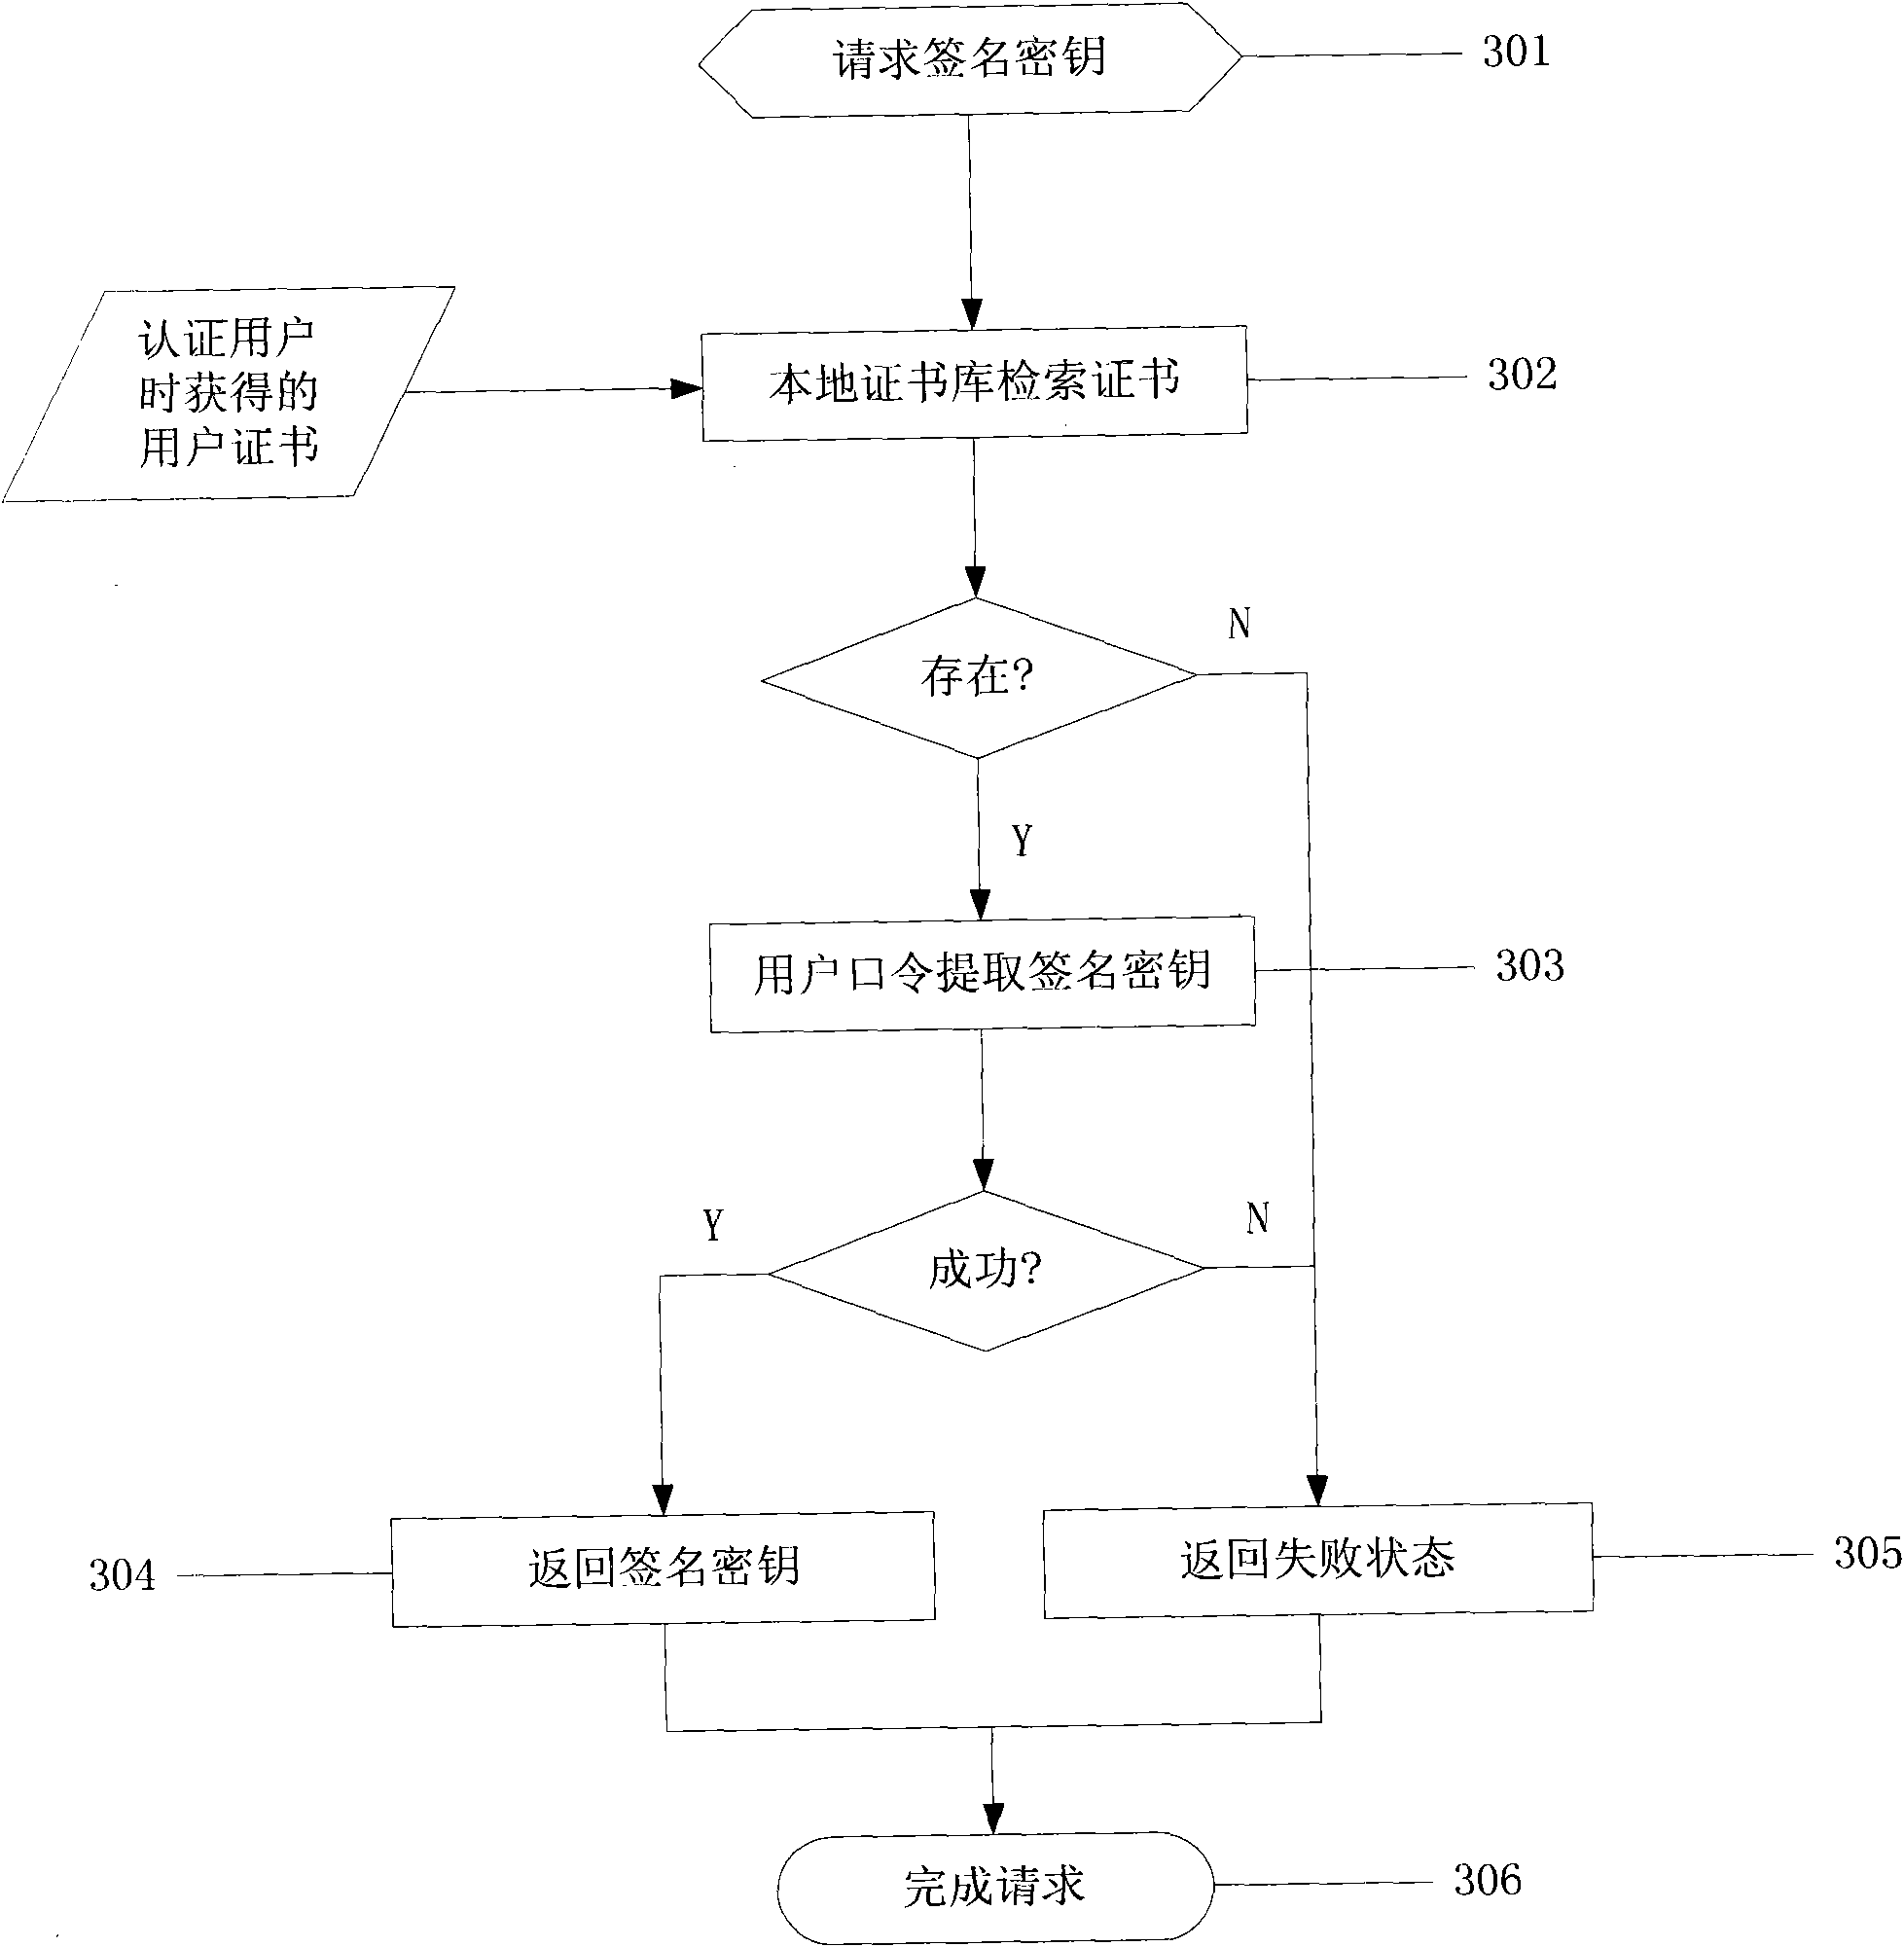 Network identity authentication system and method